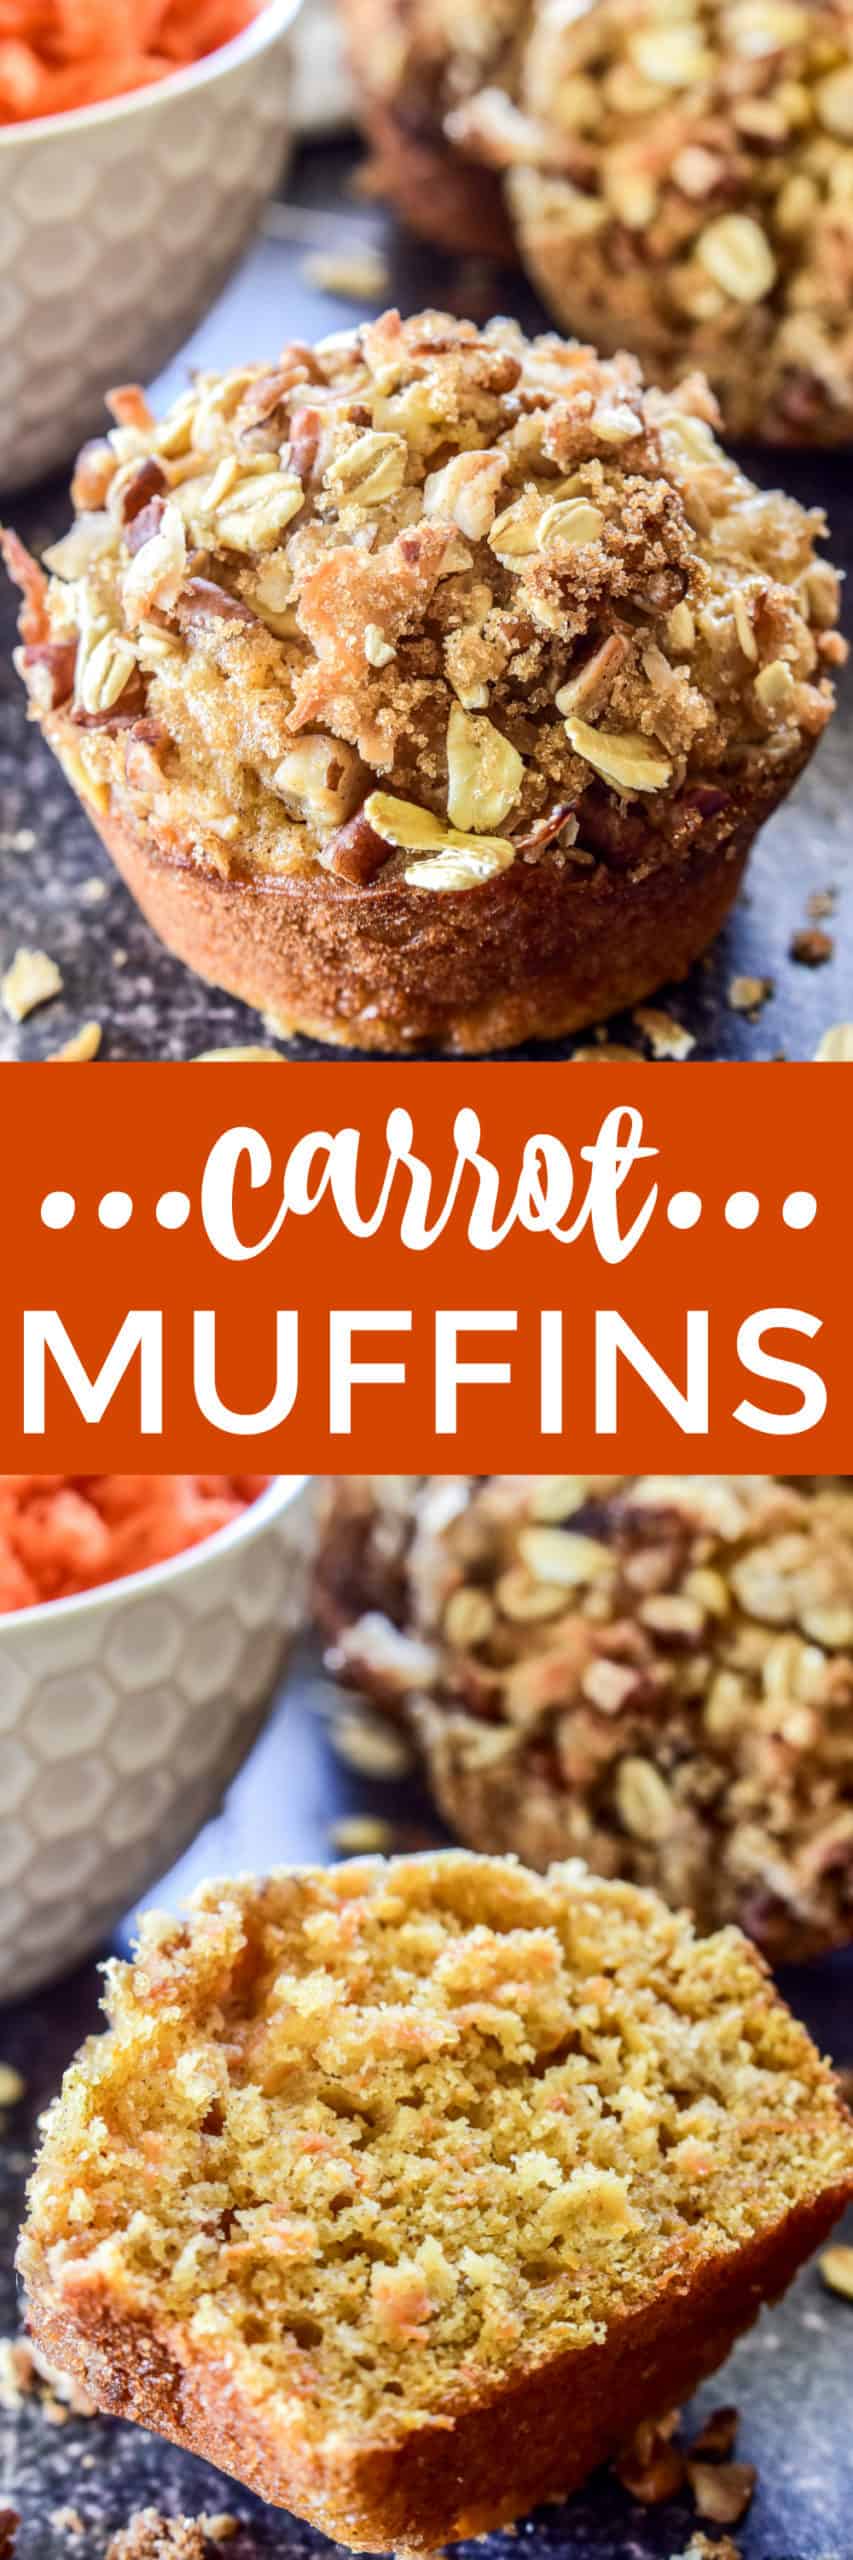 Carrot Muffins collage with text